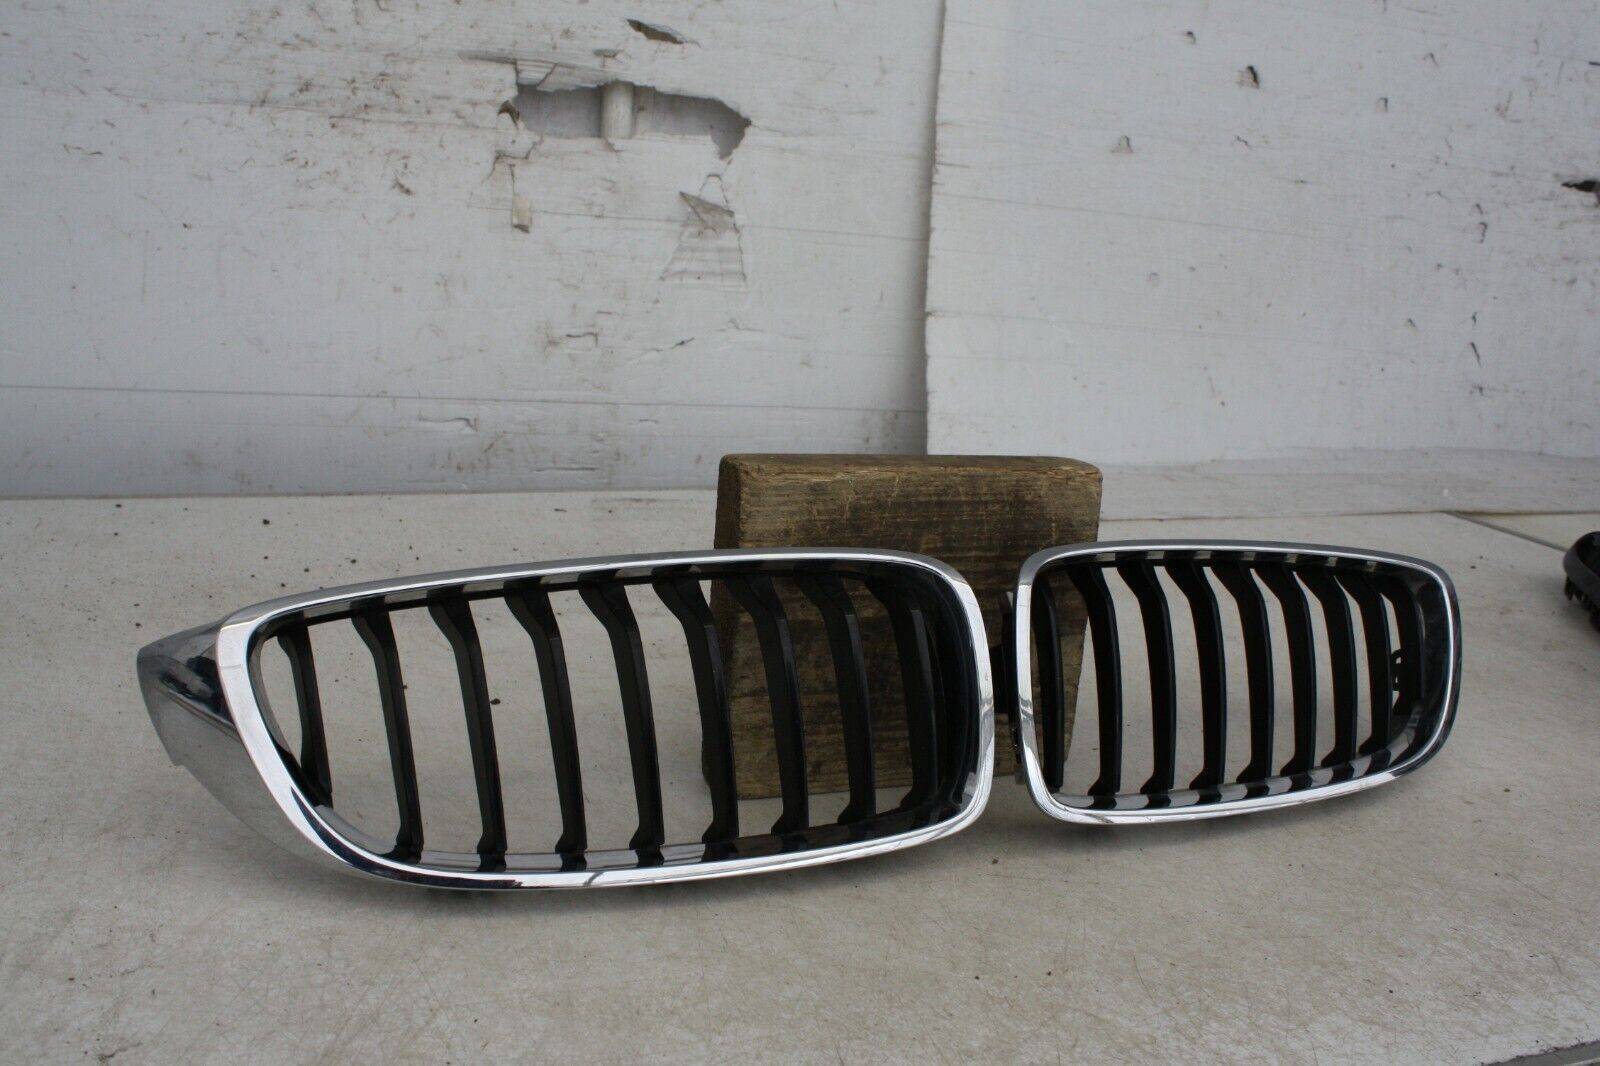 BMW-4-SERIES-FRONT-KIDNEY-GRILLS-LEFT-RIGHT-2013-TO-2017-175367531979-3